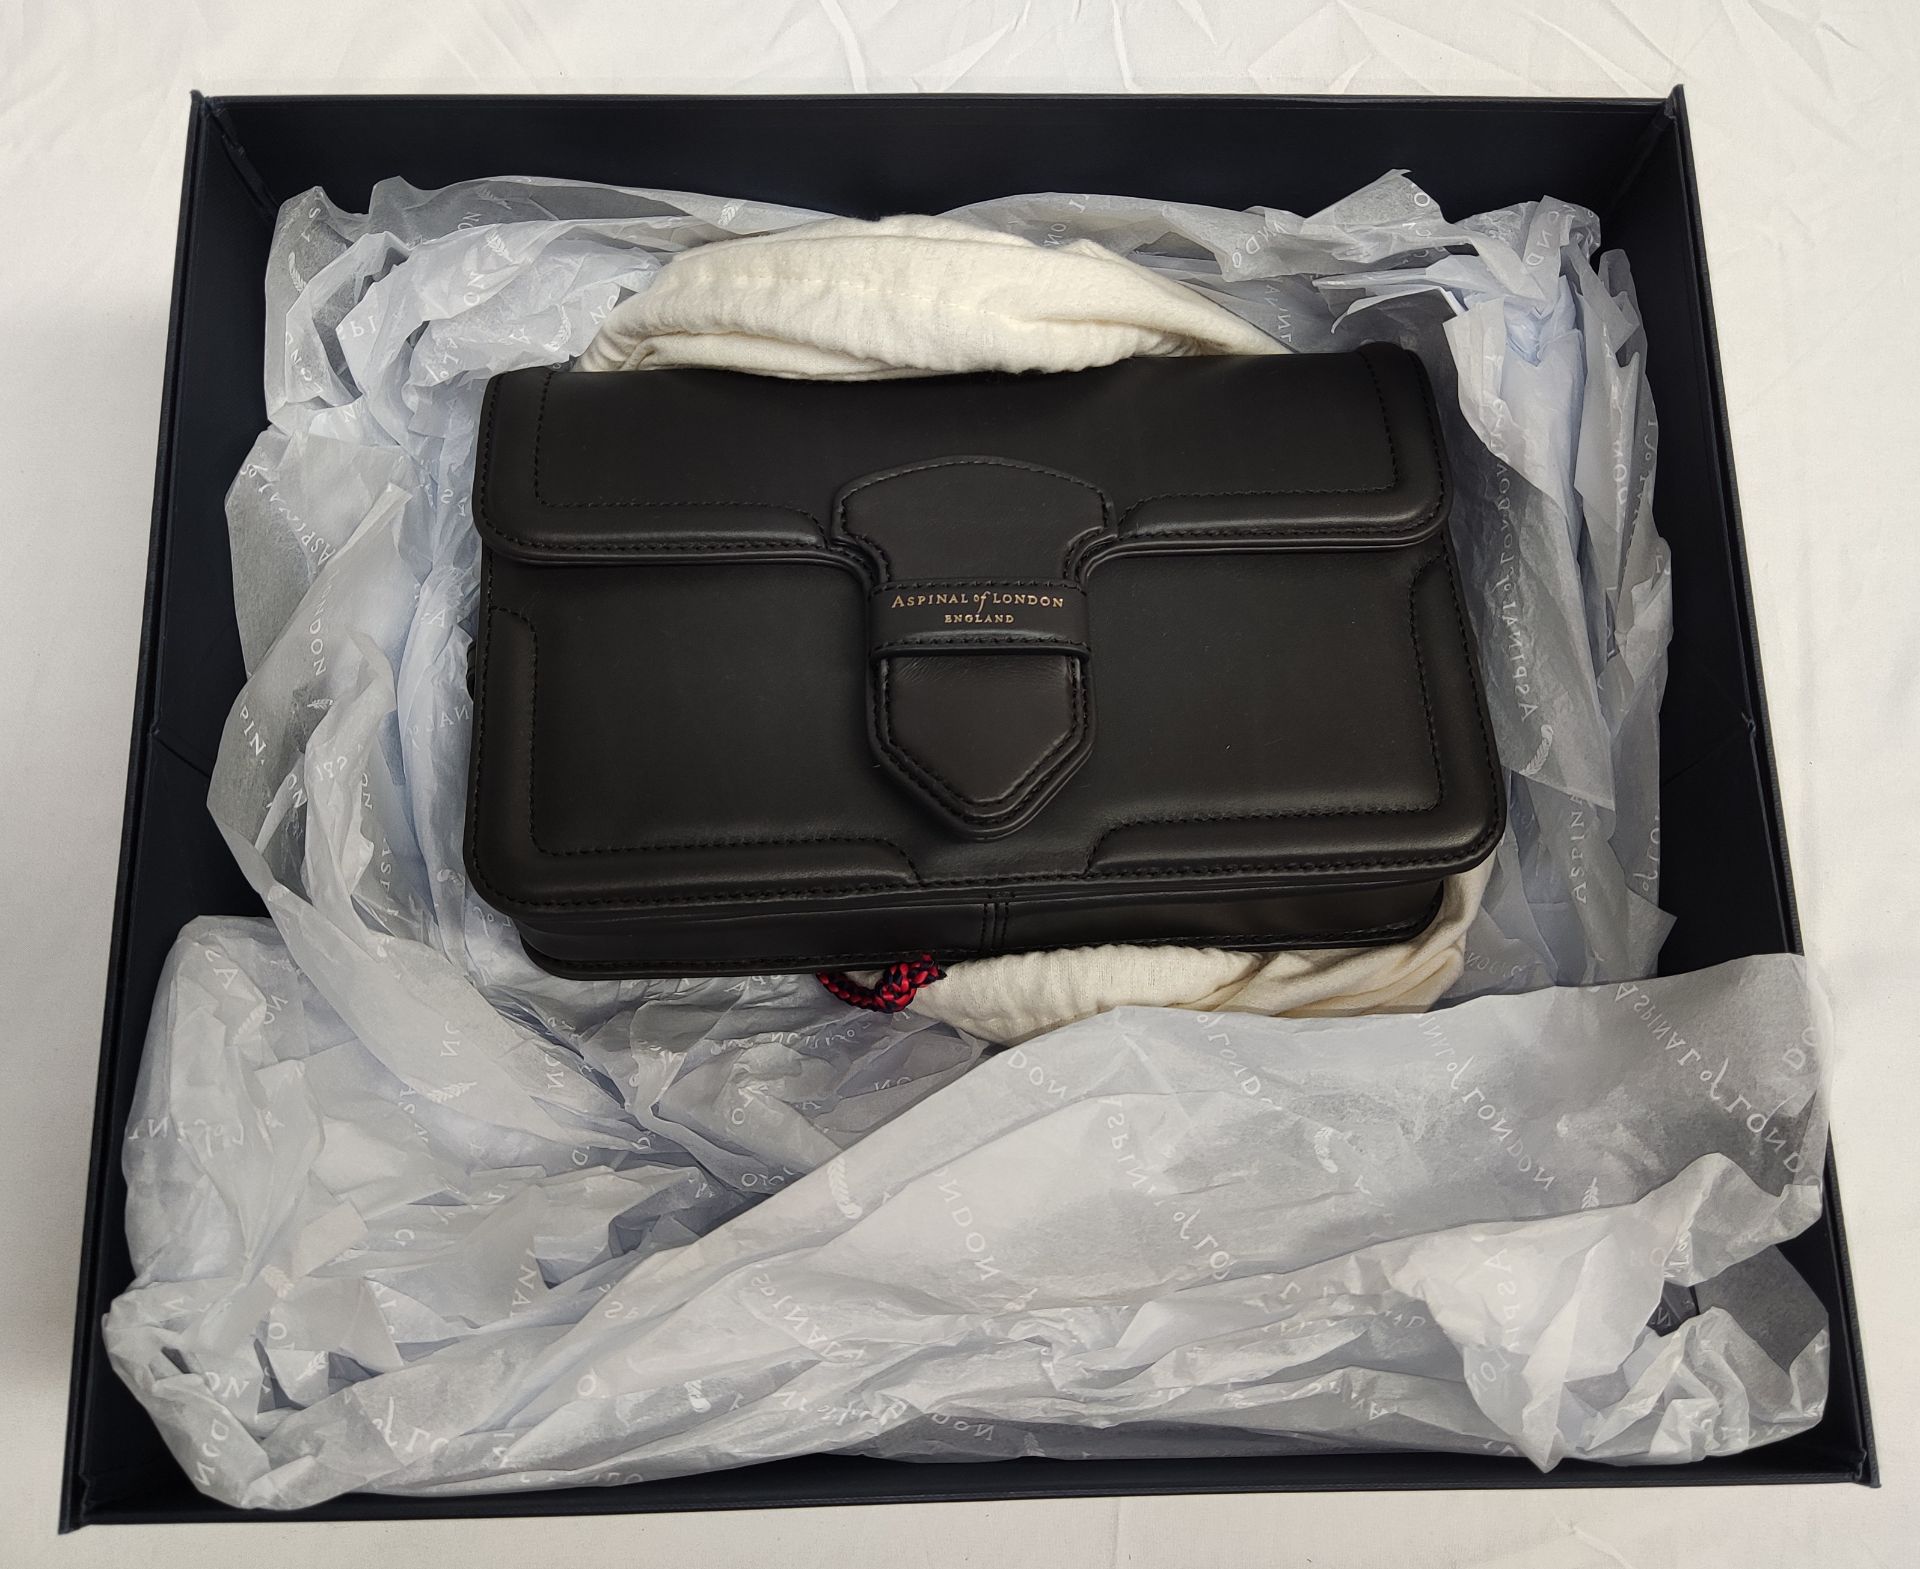 1 x ASPINAL OF LONDON The Resort Leather Bag In Smooth Black - Boxed - Original RRP £525 - Ref: - Image 5 of 24